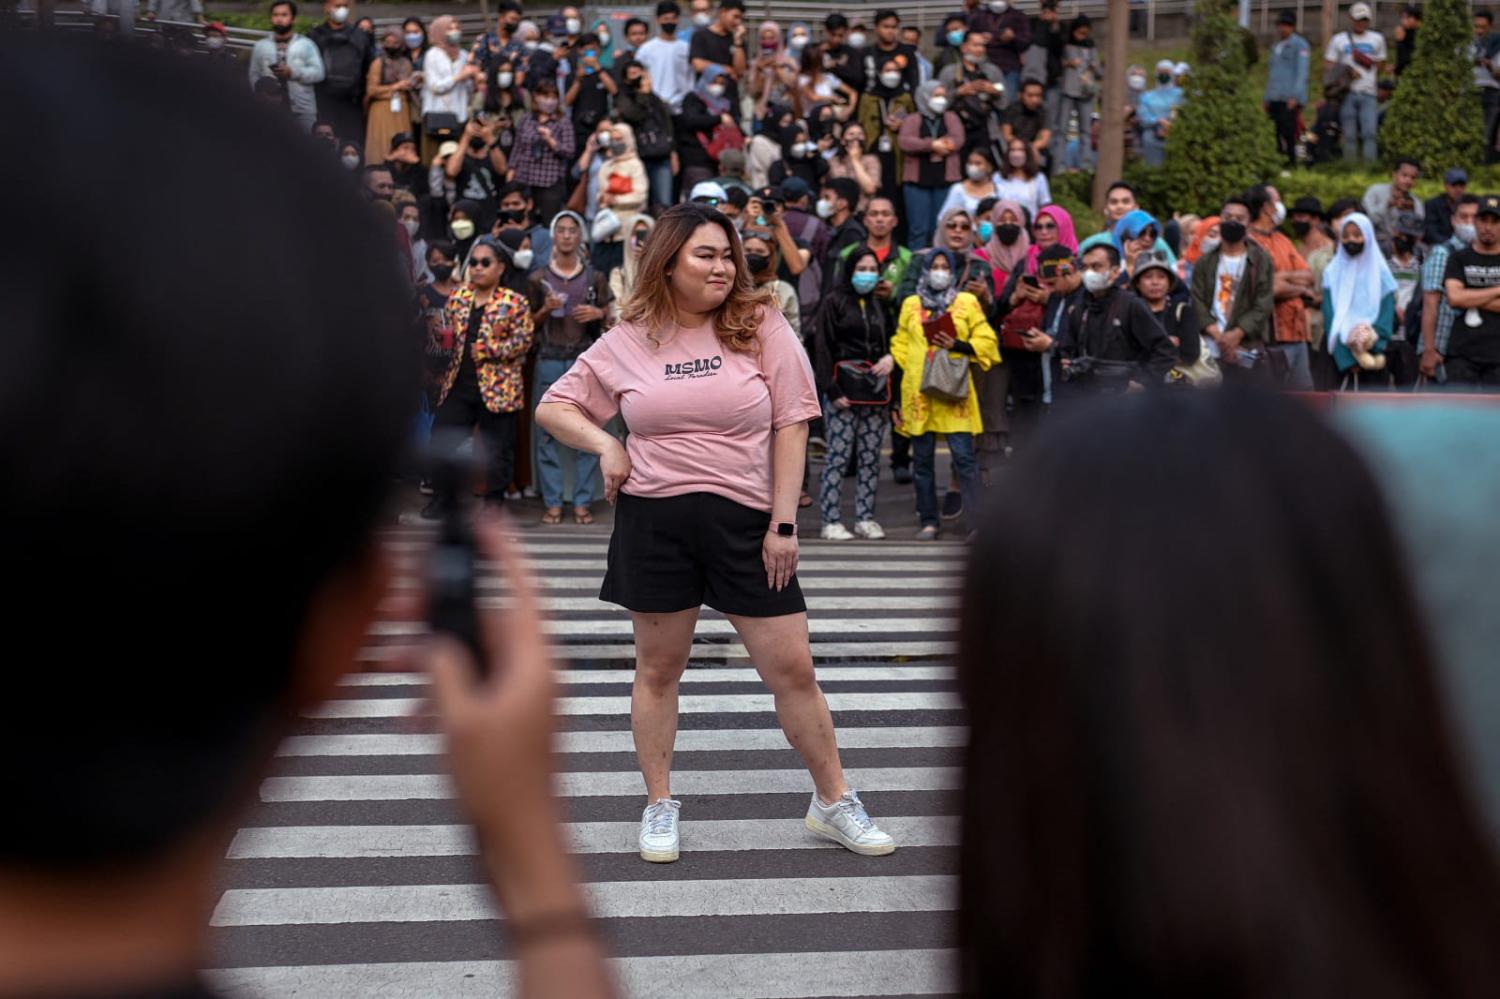 Young Indonesians showcase self-styled fashion creations at a pedestrian crossing turned catwalk, Jakarta, 22 June 2022 (Bay Ismoyo/AFP via Getty Images)